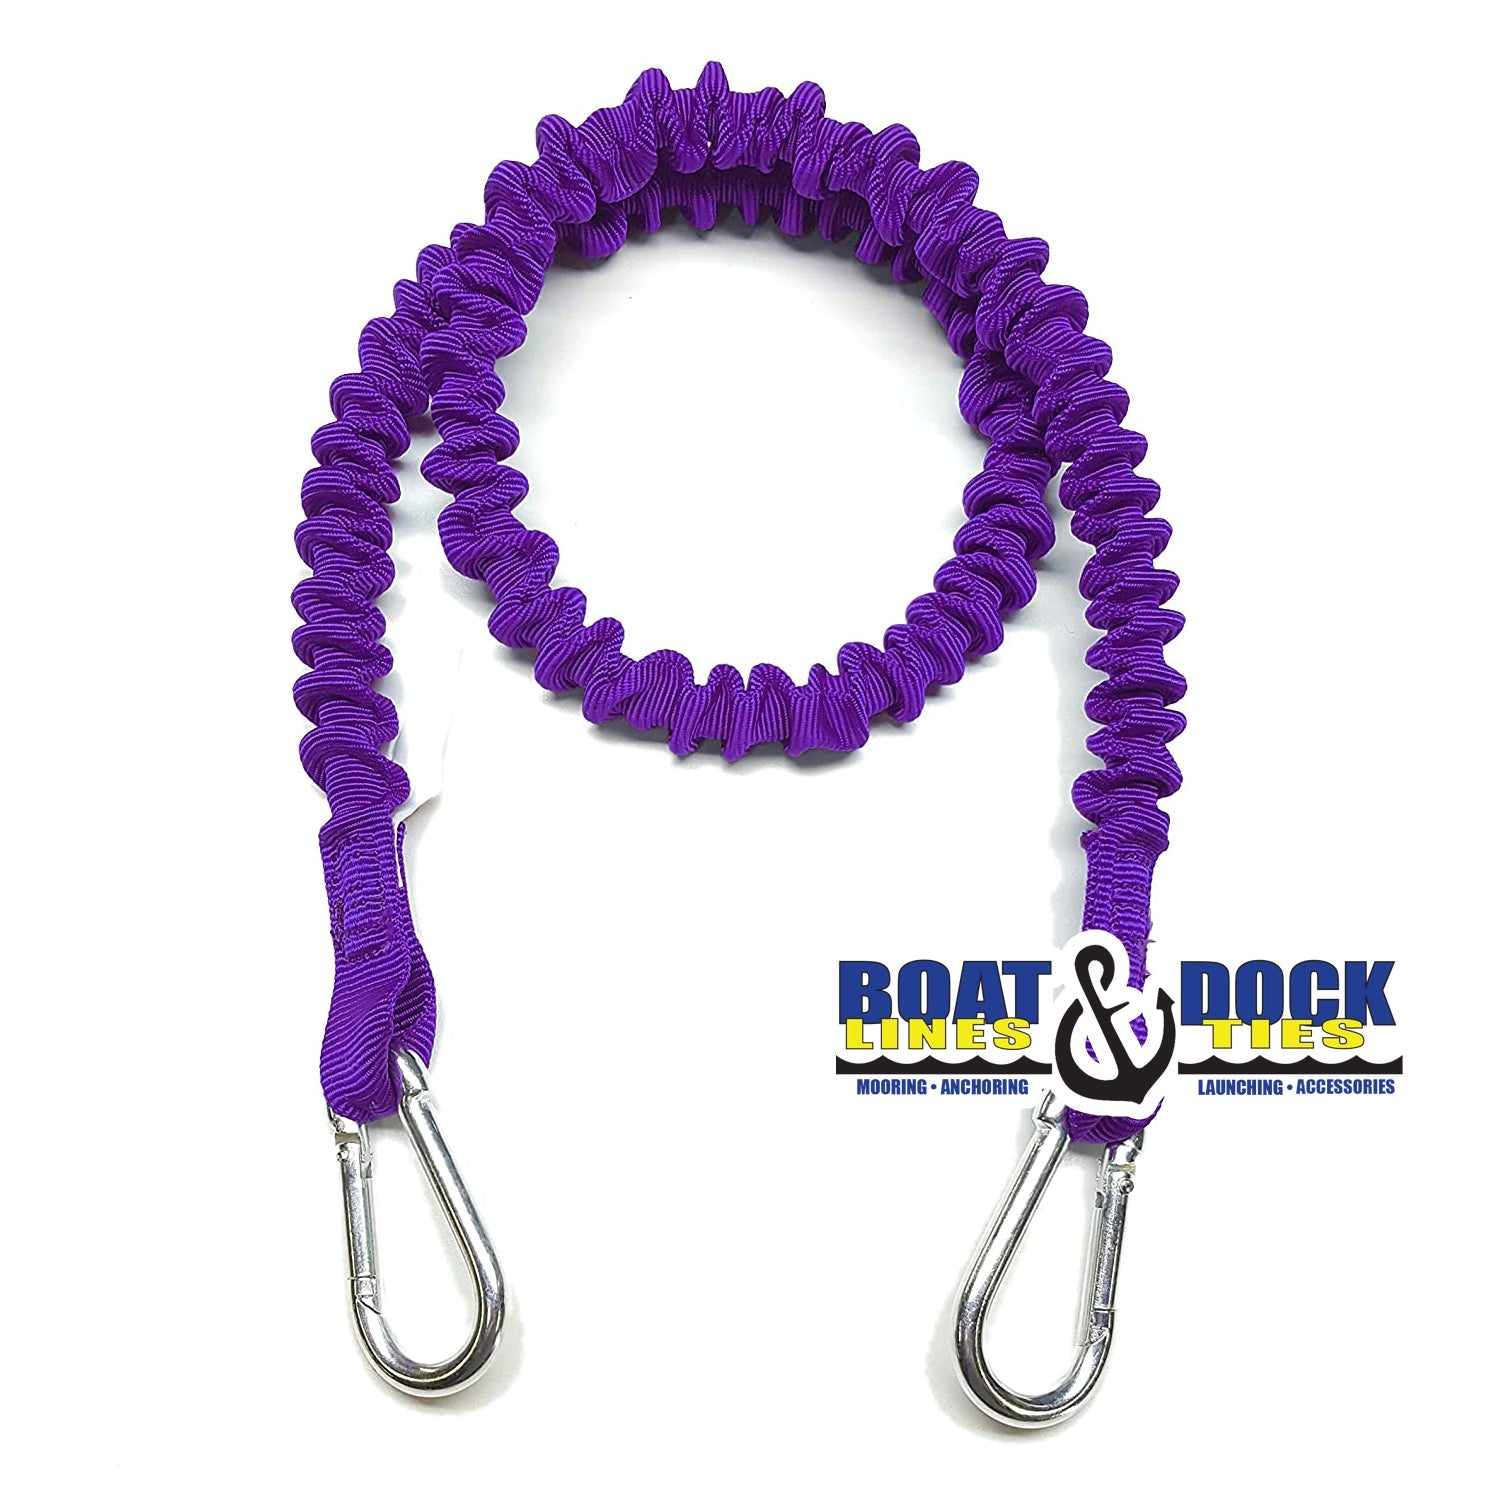 Boat Dock Tie Bungee Cords,  2 Hooked Ends, UV Protected Bungee Cords - Set of 2 - Made in USA